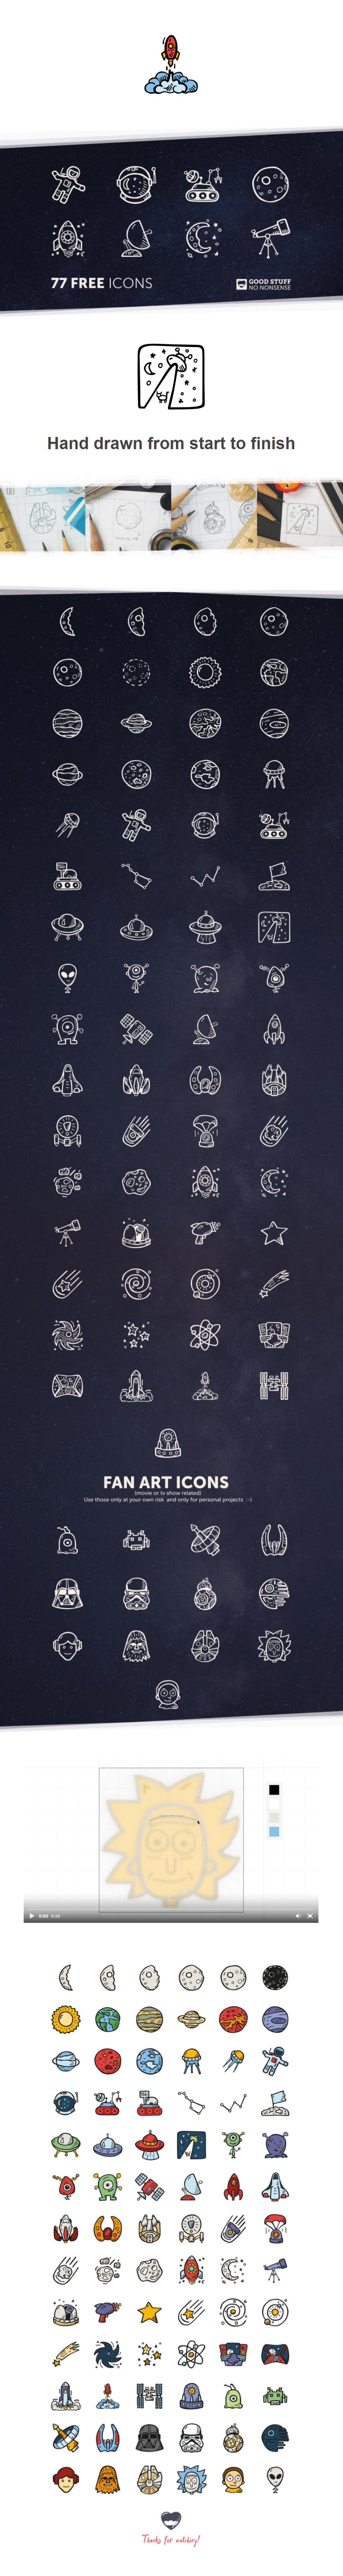 space-icon-pack-free